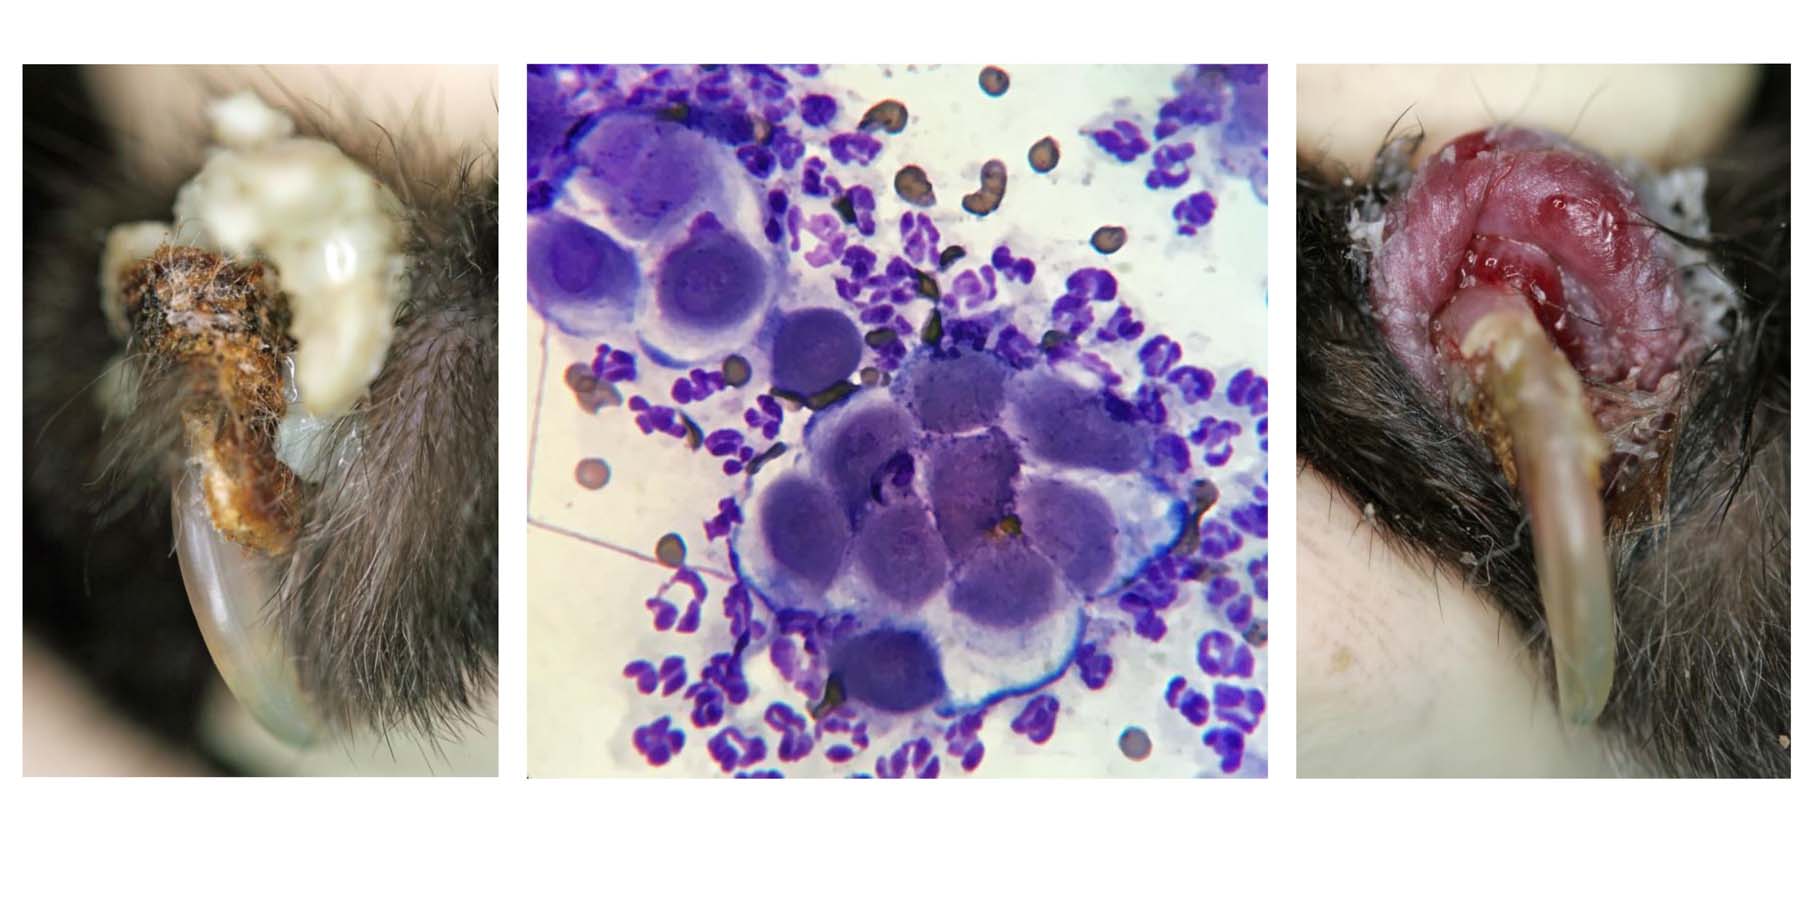 Feline Pemphigus Foliaceus: Inflamed Claw Bed (Paronychia), before & after Cleansing, immediate Diagnostic Cytology